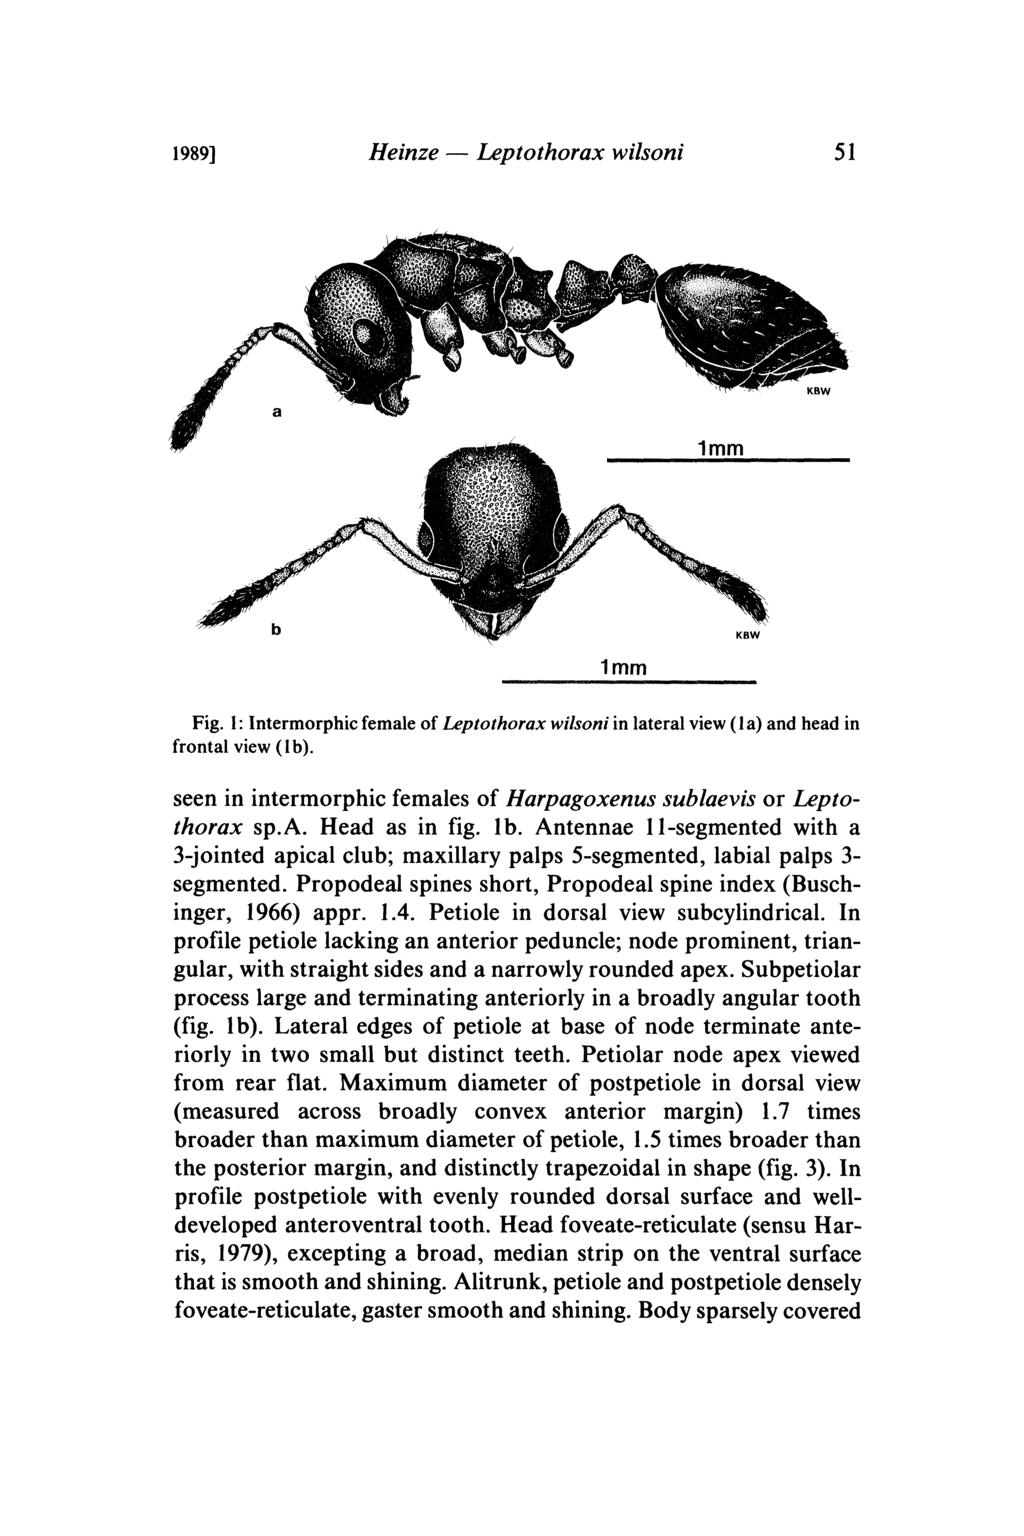 1989] Heinze Leptothorax wilsoni 51 lmm Fig. 1: lntermorphic female of Leptothorax wilsoni in lateral view (1 a) and head in frontal view (lb).